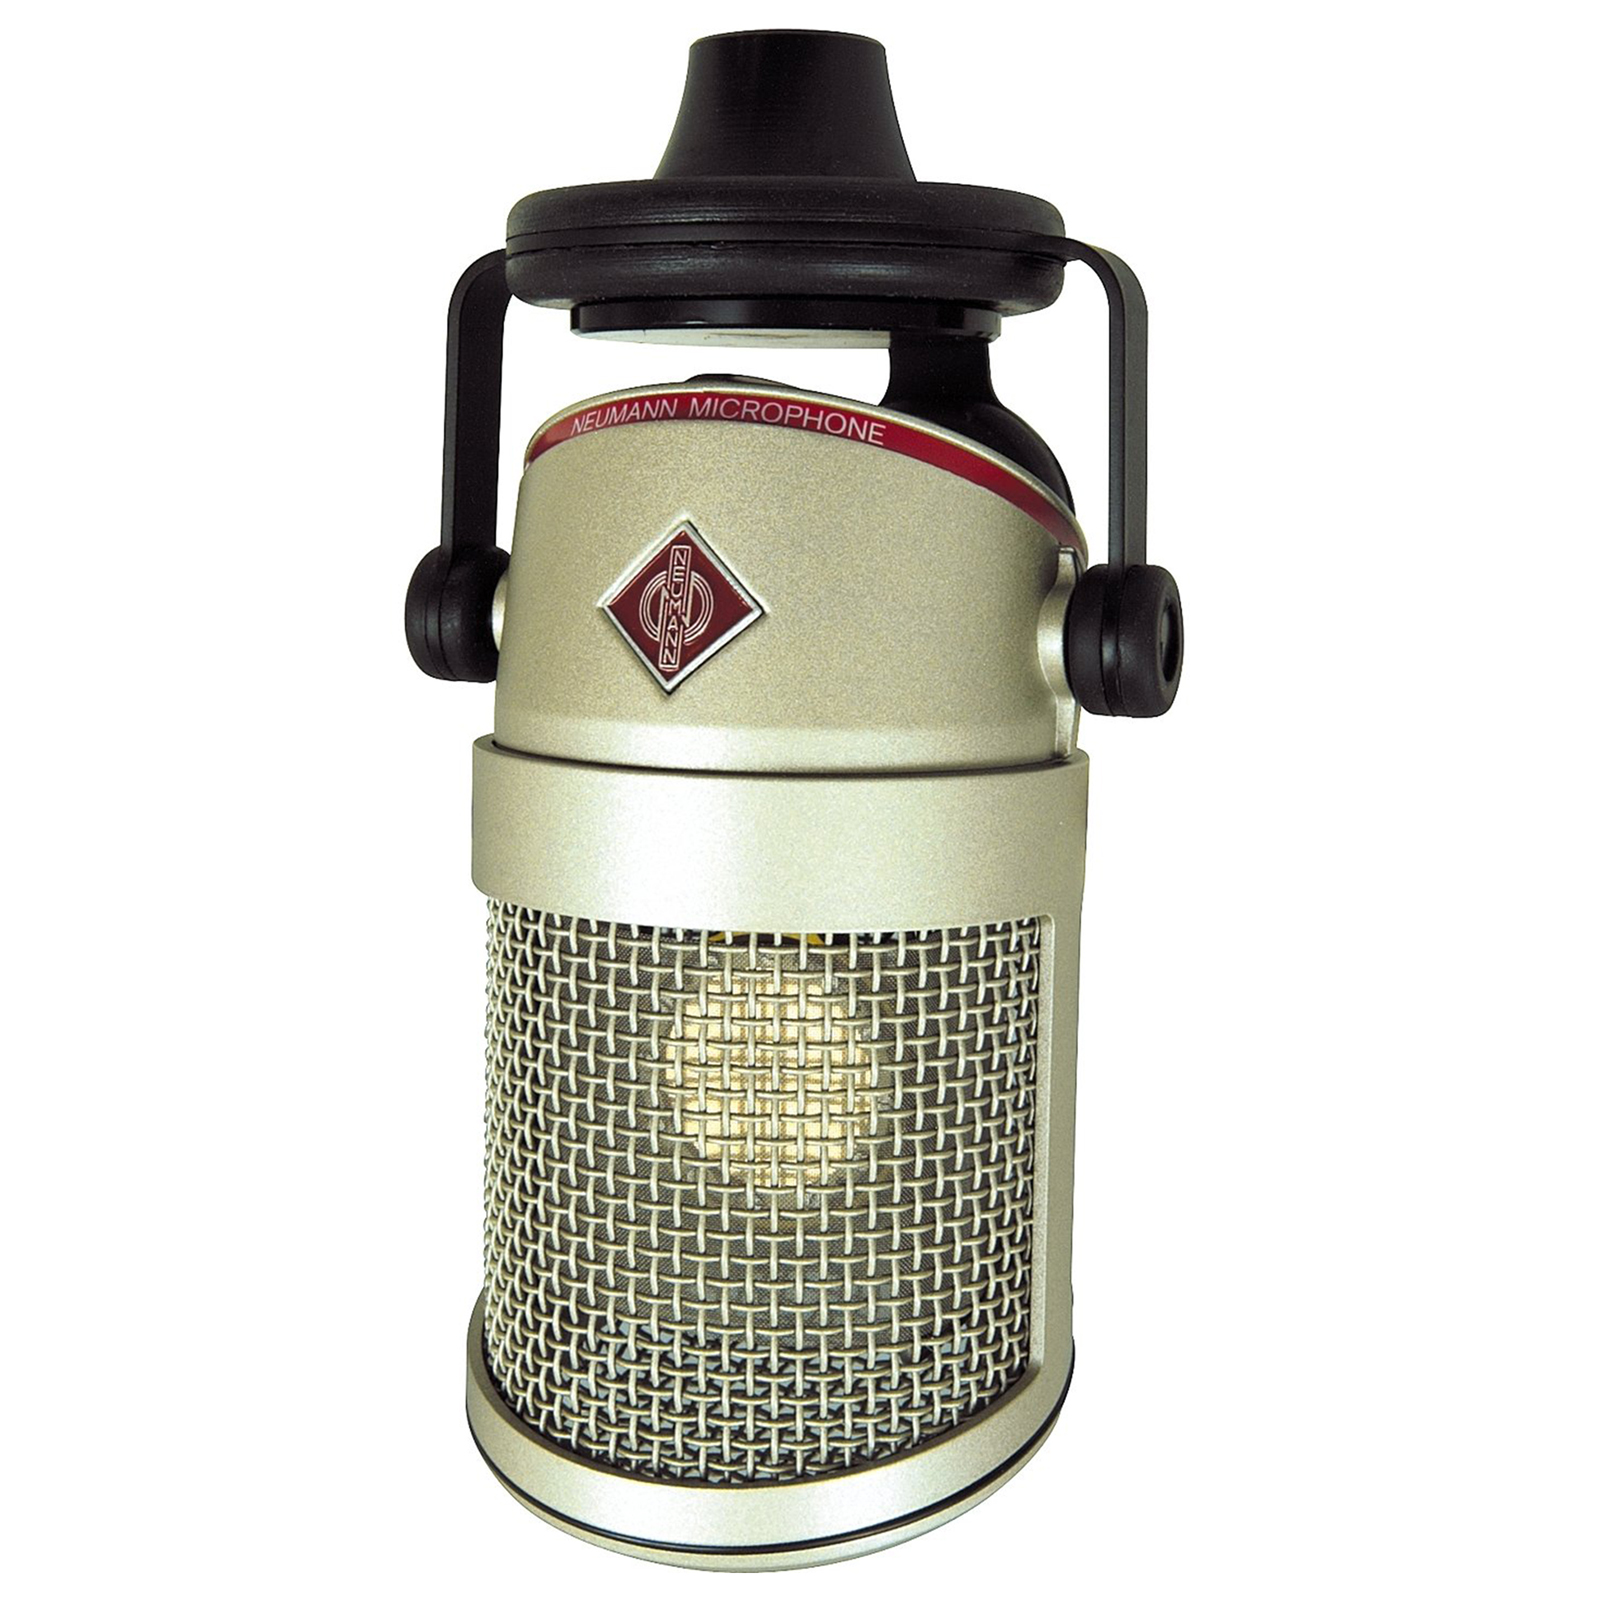 Image of Neumann BCM 104 Microphone